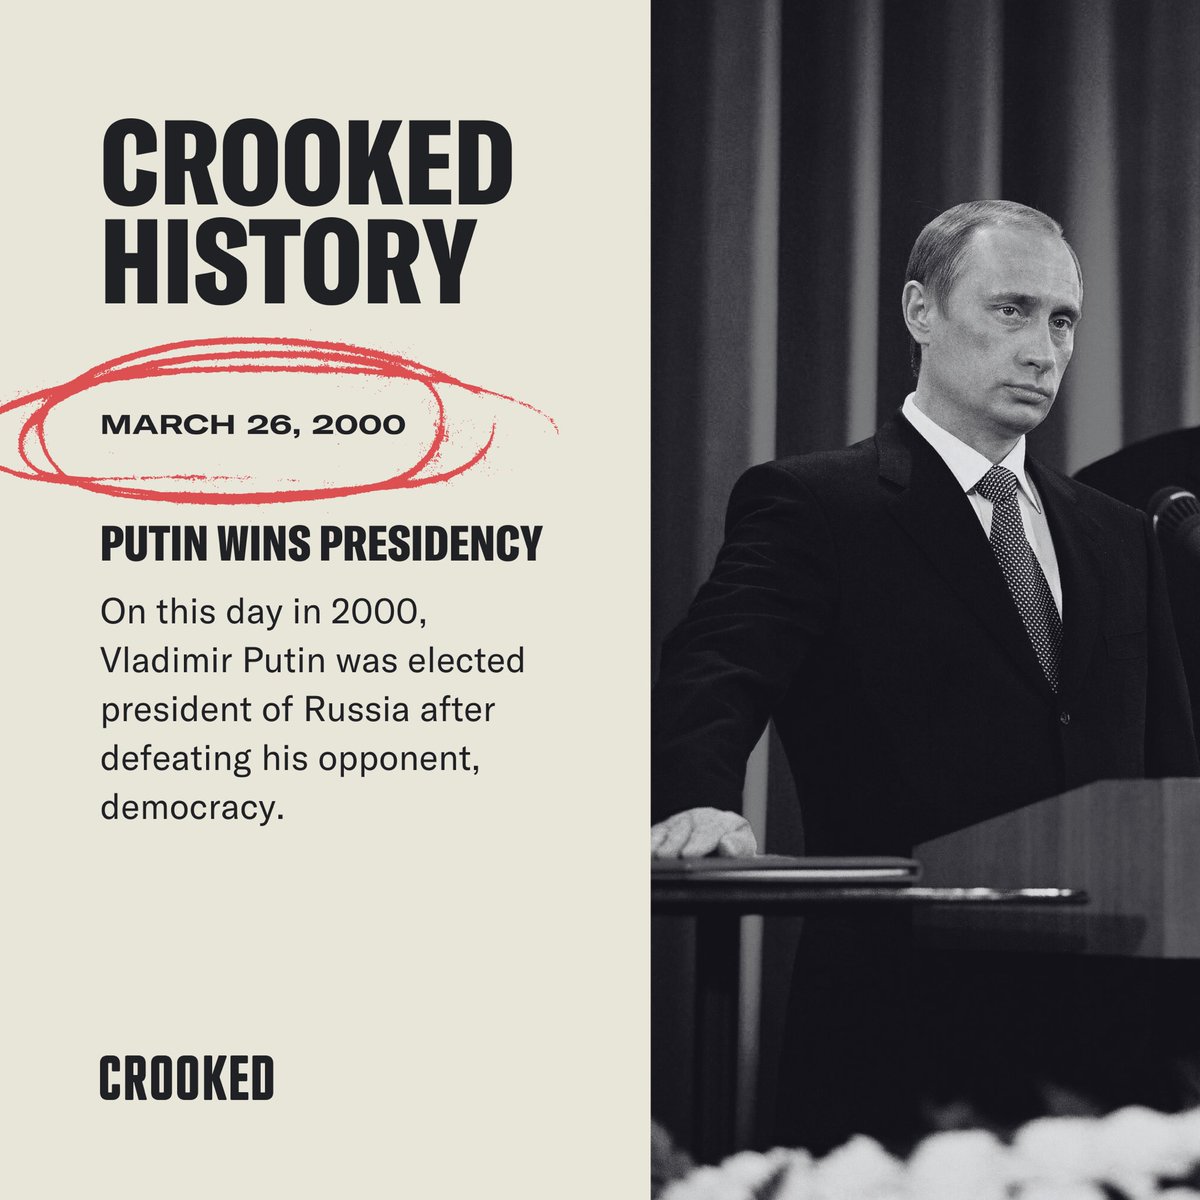 He celebrated by almost having an emotion. #CrookedMedia #CrookedHistory #Putin